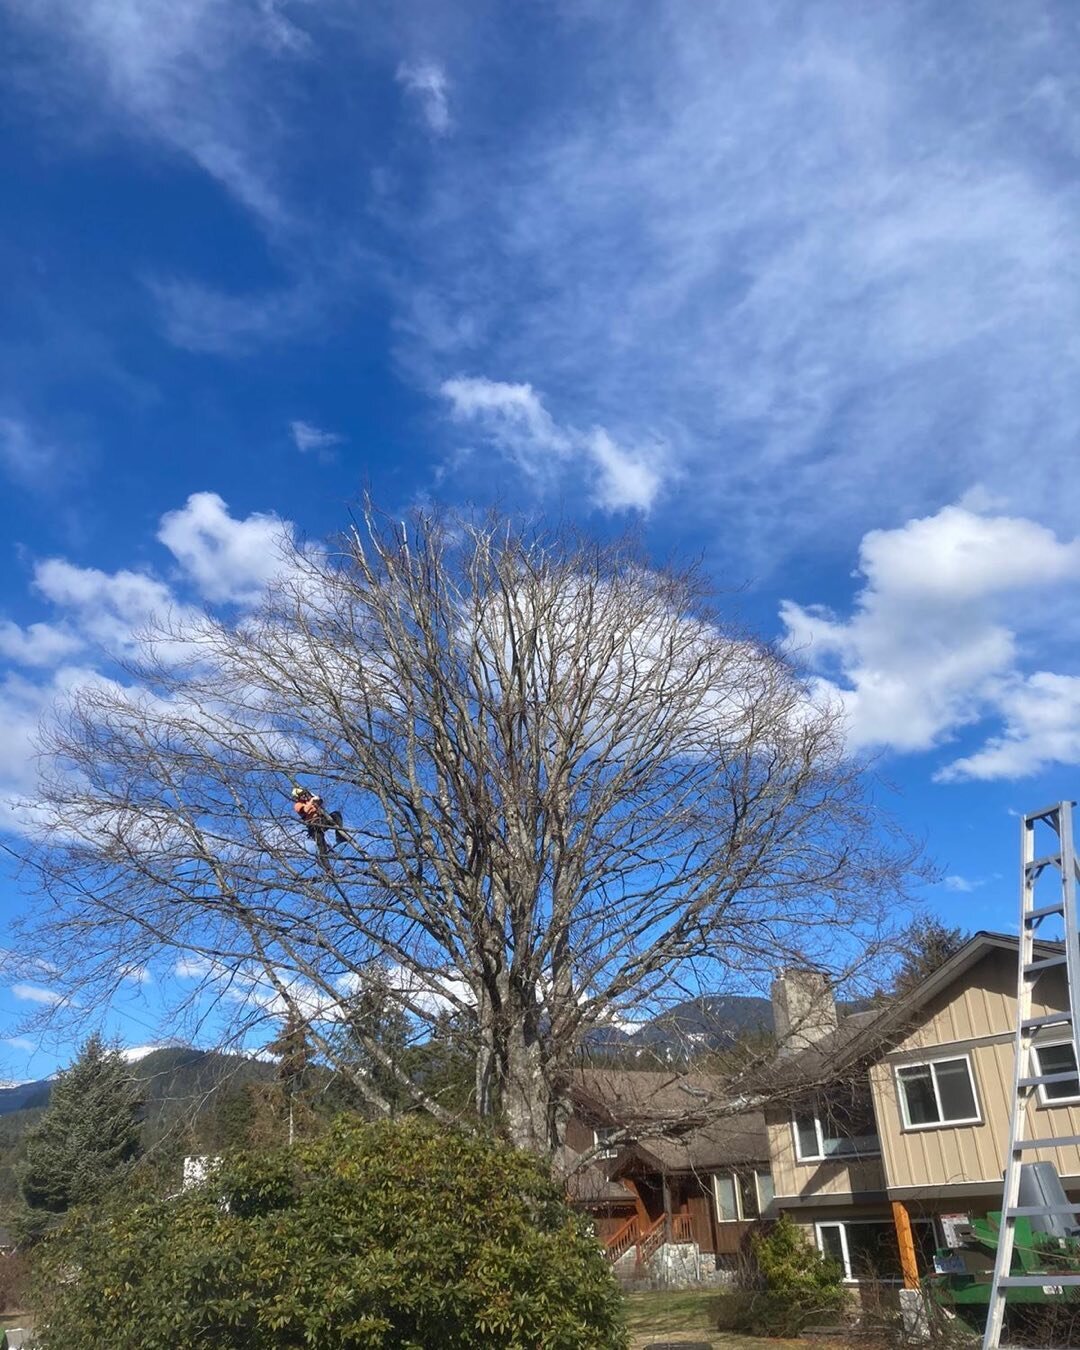 Spring is here! Pruning this beautiful beech tree in the sun.